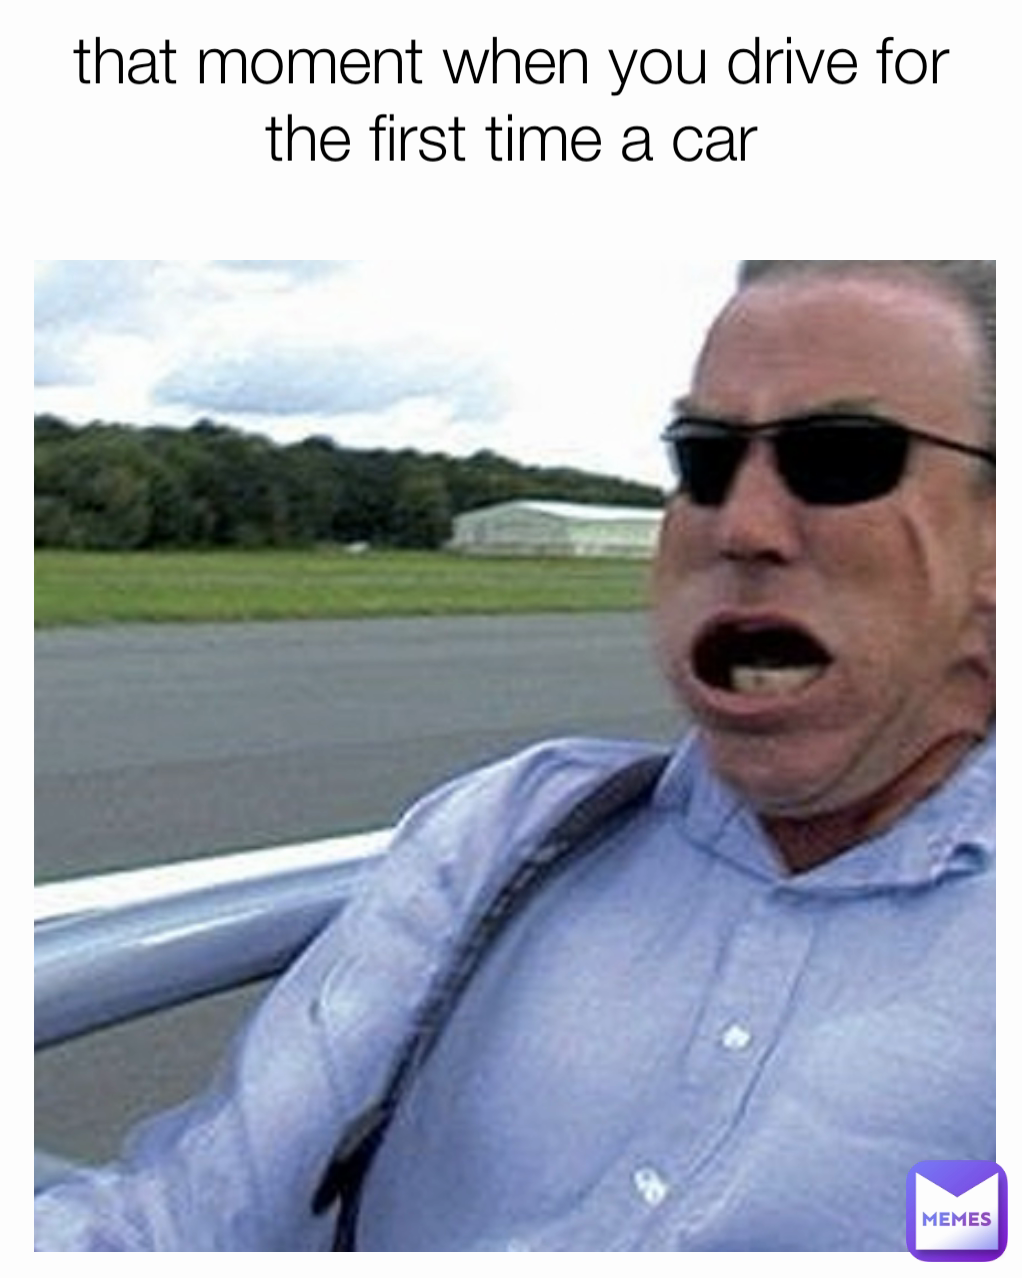 that moment when you drive for the first time a car
